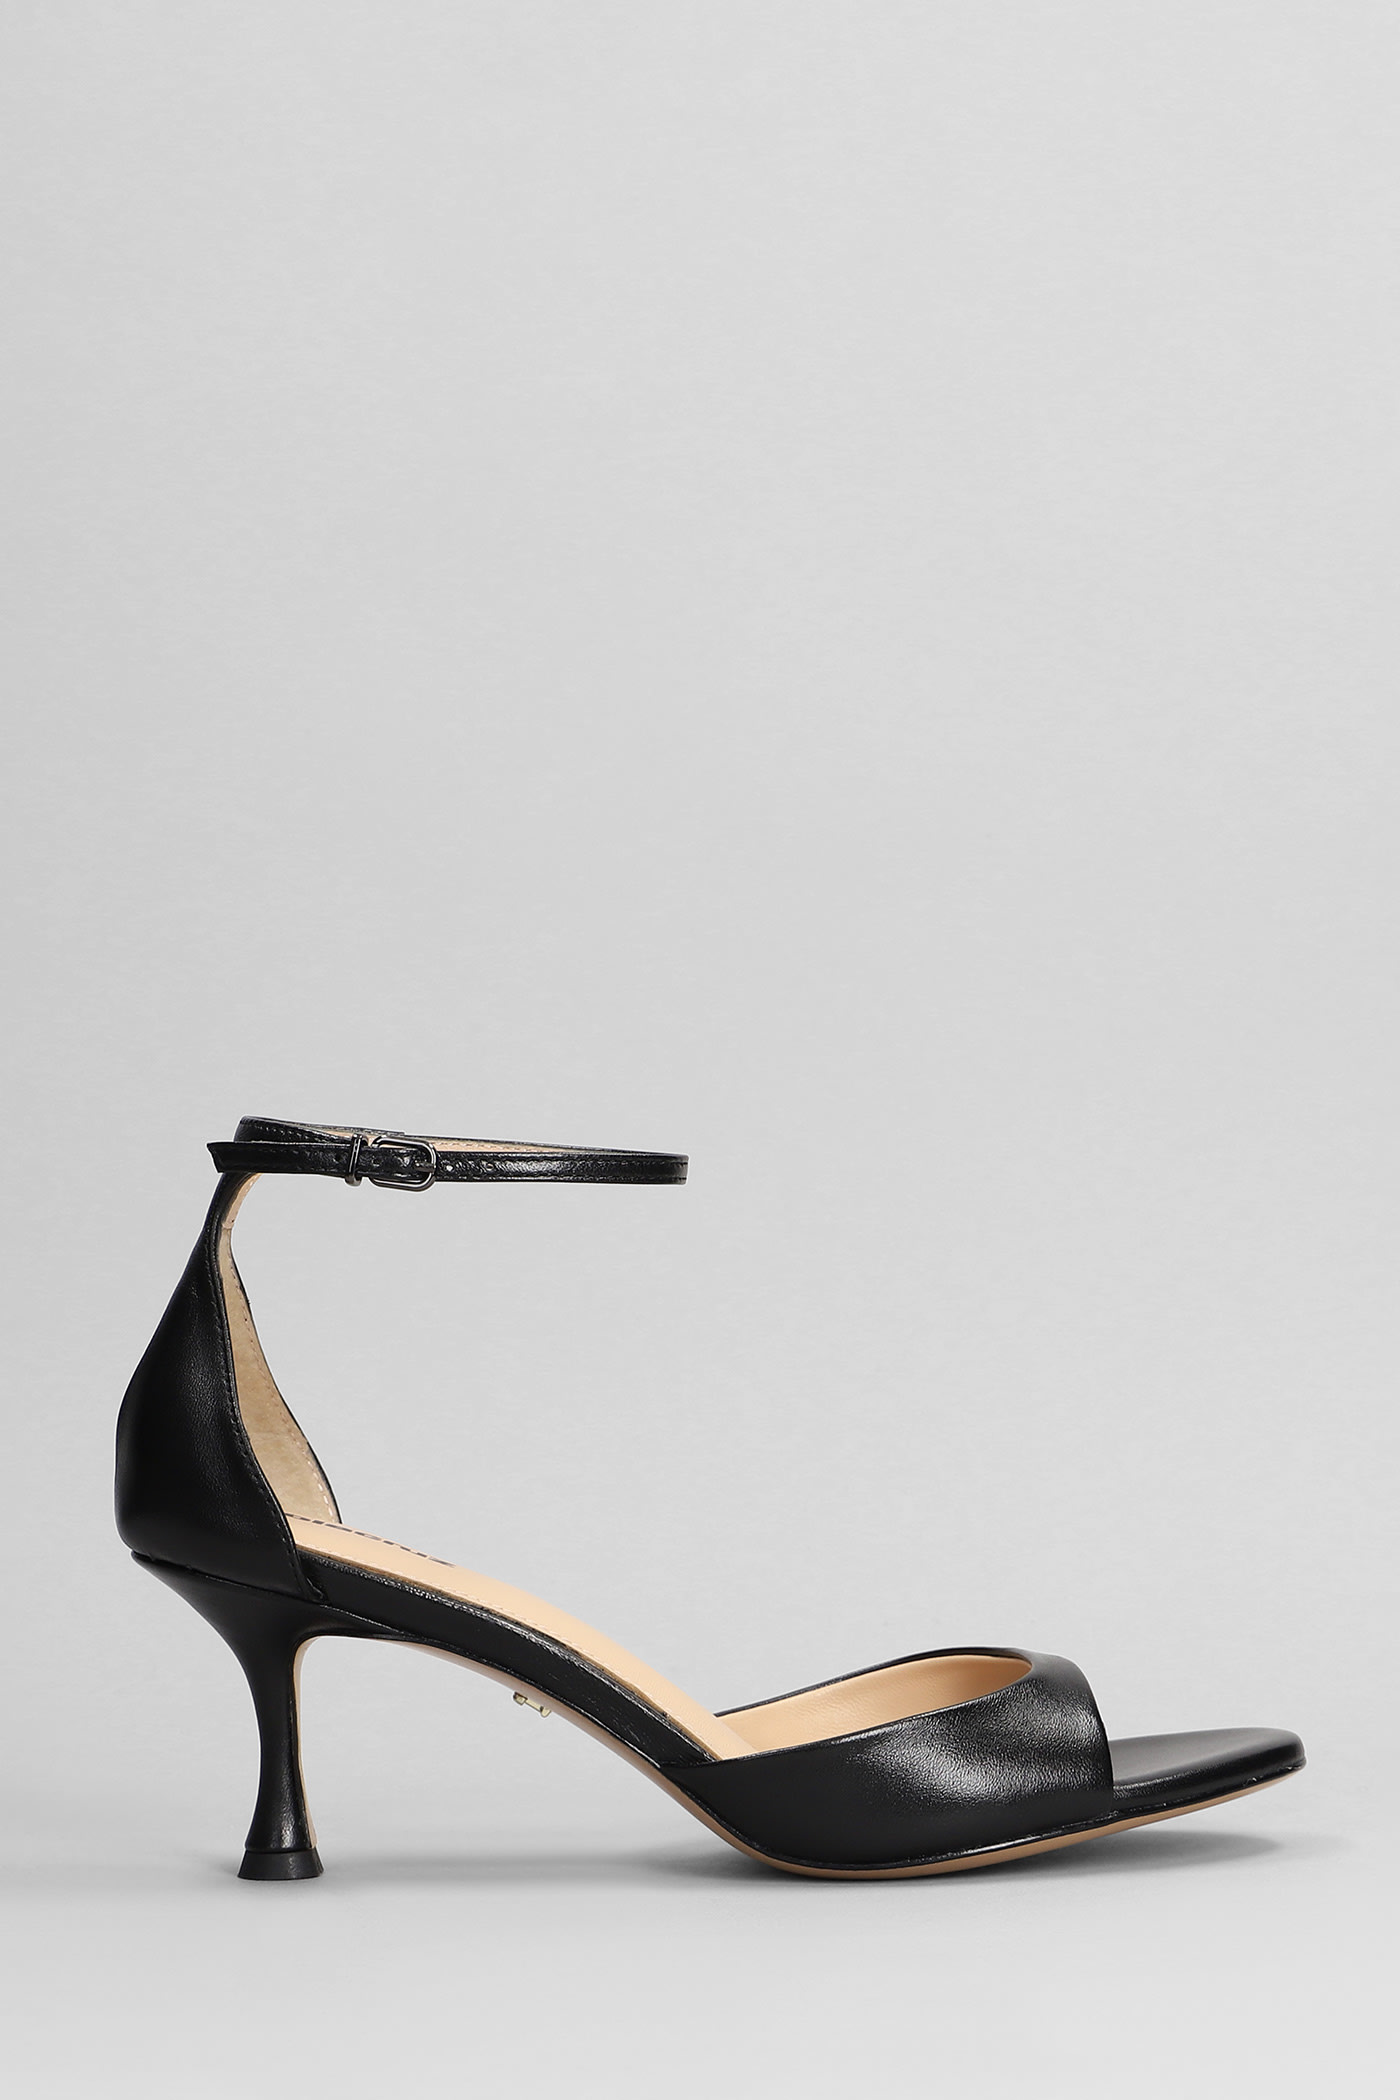 Petrina Sandals In Black Leather